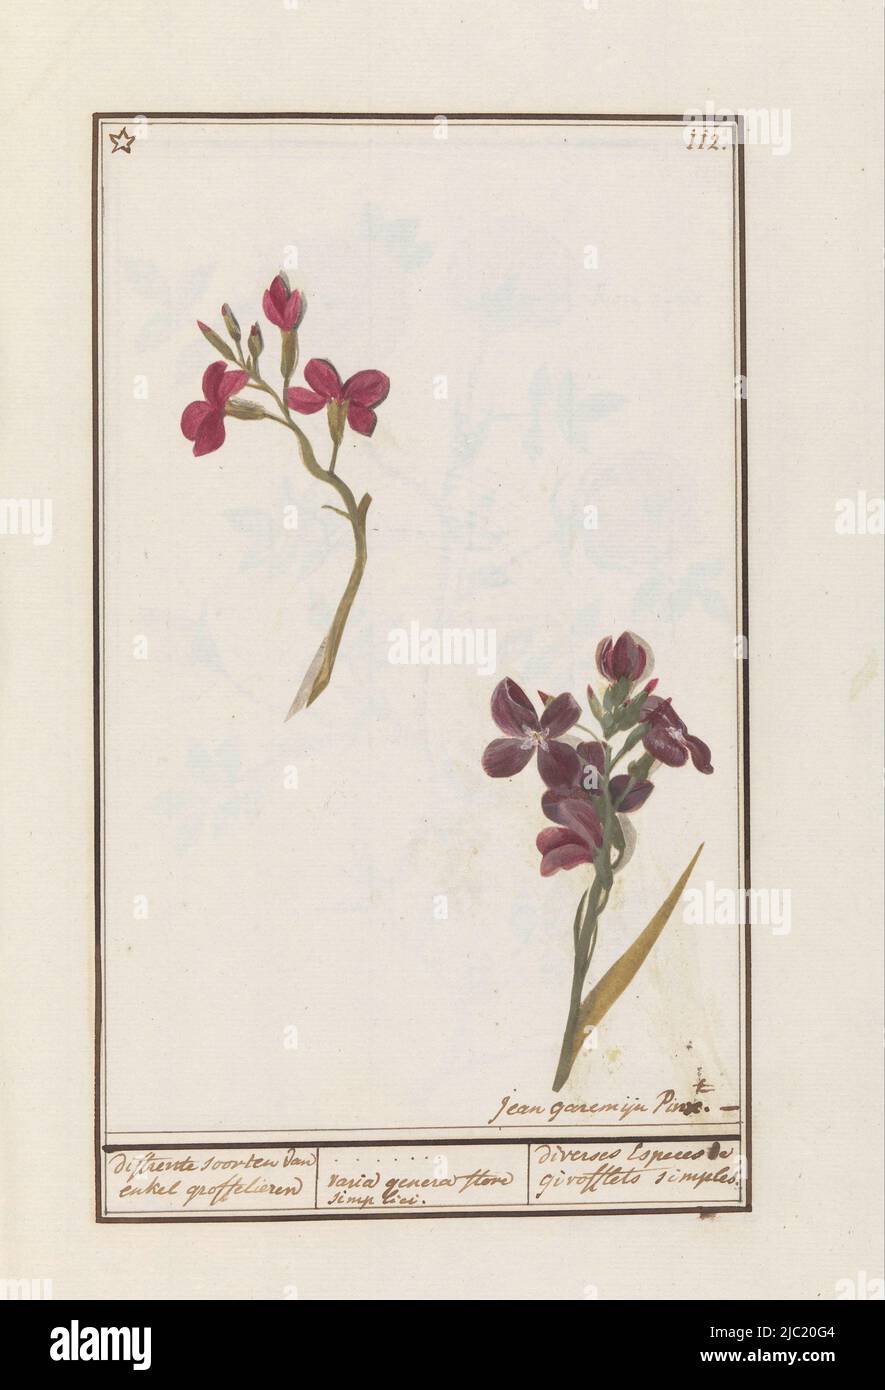 Wallflower (single). Numbered upper right: 112. Top left marked with an asterisk. Part of the second album with drawings of flowers and plants. Ninth of twelve albums with drawings of animals, birds and plants known around 1600, commissioned by emperor Rudolf II. With notes in Dutch, Latin and French., Wallflower (Erysimum cheiri) differents species of single ruffles / varia genera flore simplici. / diverses Especes de girofflets simples, draughtsman: Jan Anton Garemyn, (mentioned on object), Bruges, 1790 - 1799, paper, brush, h 430 mm × w 270 mm Stock Photo